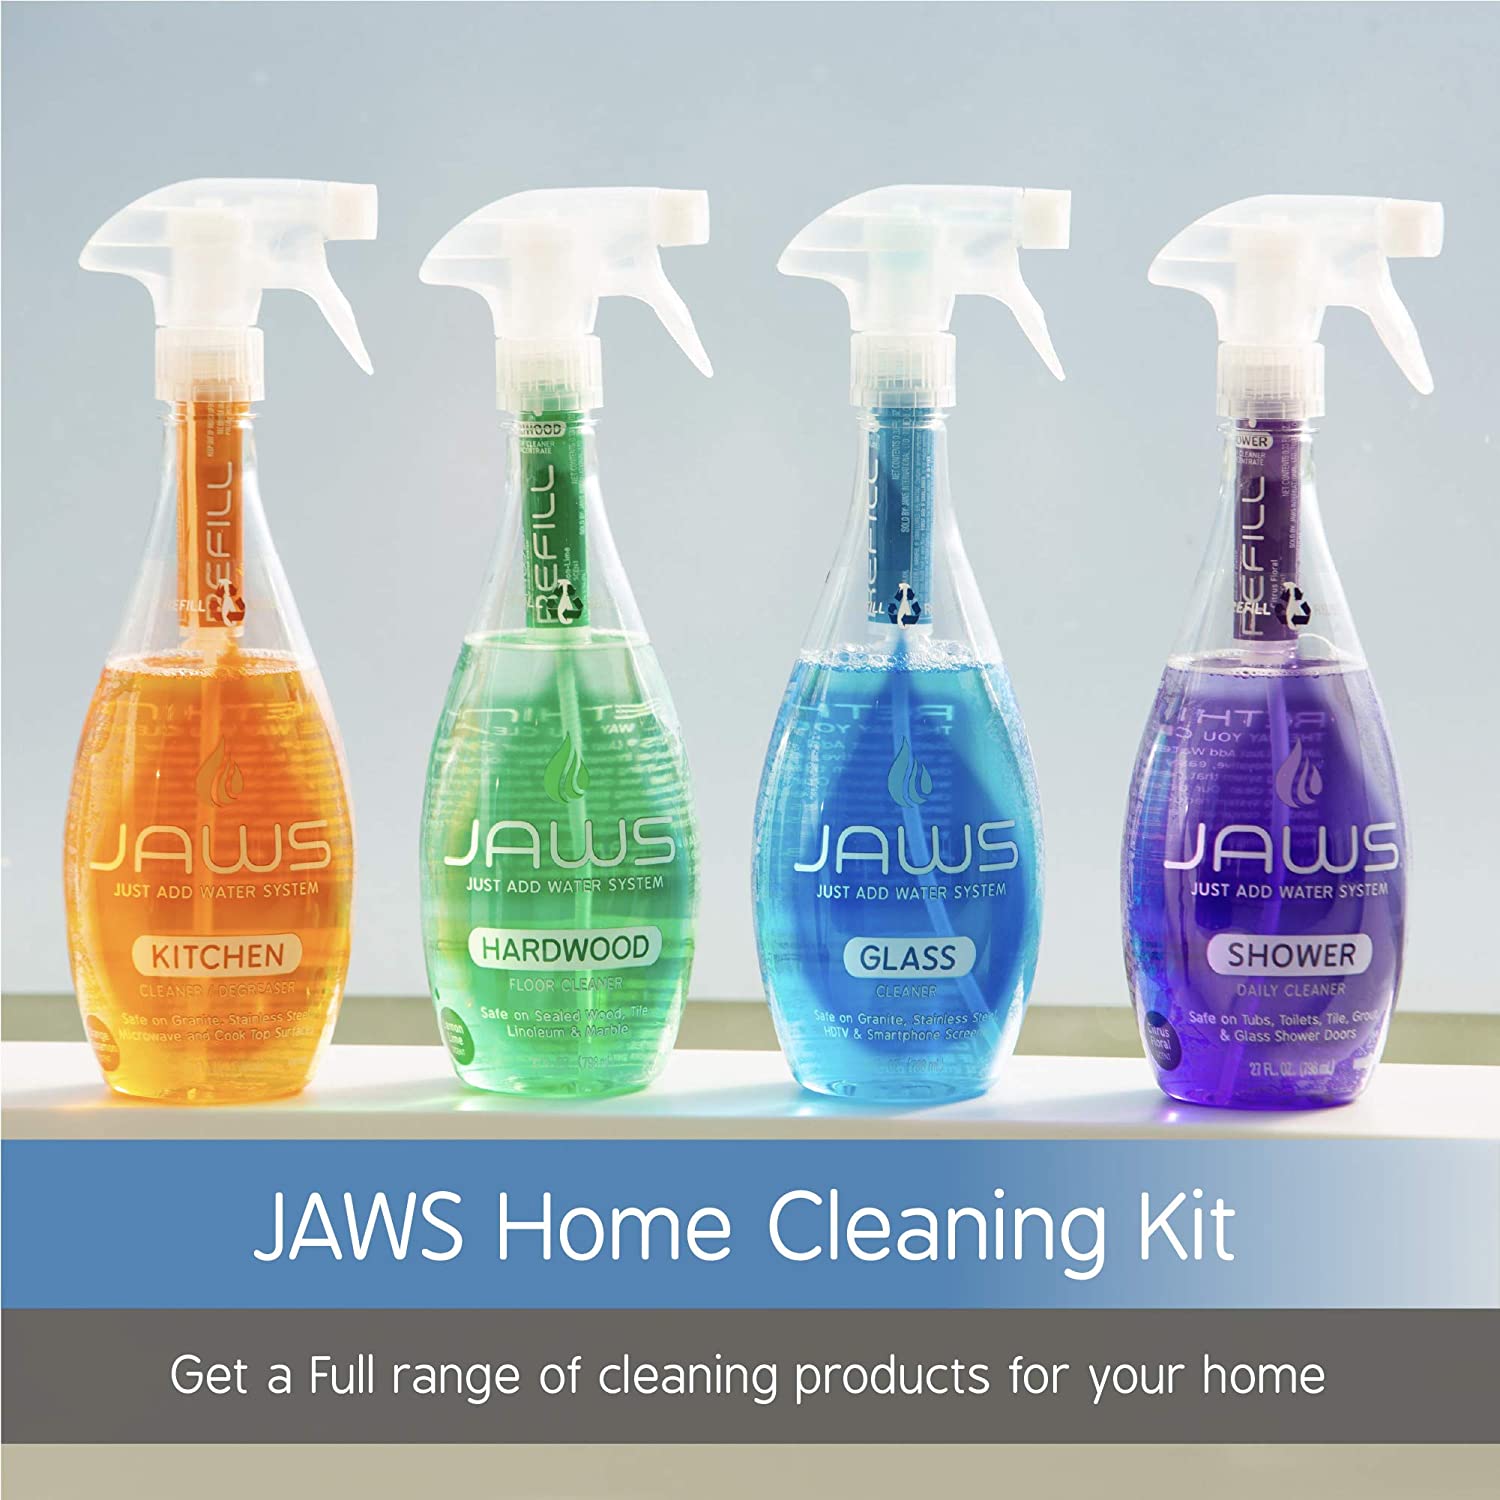 https://xulnaz.com/wp-content/uploads/2020/02/JAWS-Cleaners-Home-Cleaning-Kit-Multi-Surface-Kitchen-Glass-Shower-and-Hardwood-Floor-2-Refill-Pods-Included-Refillable-Cleaning-Supplies-2.jpg